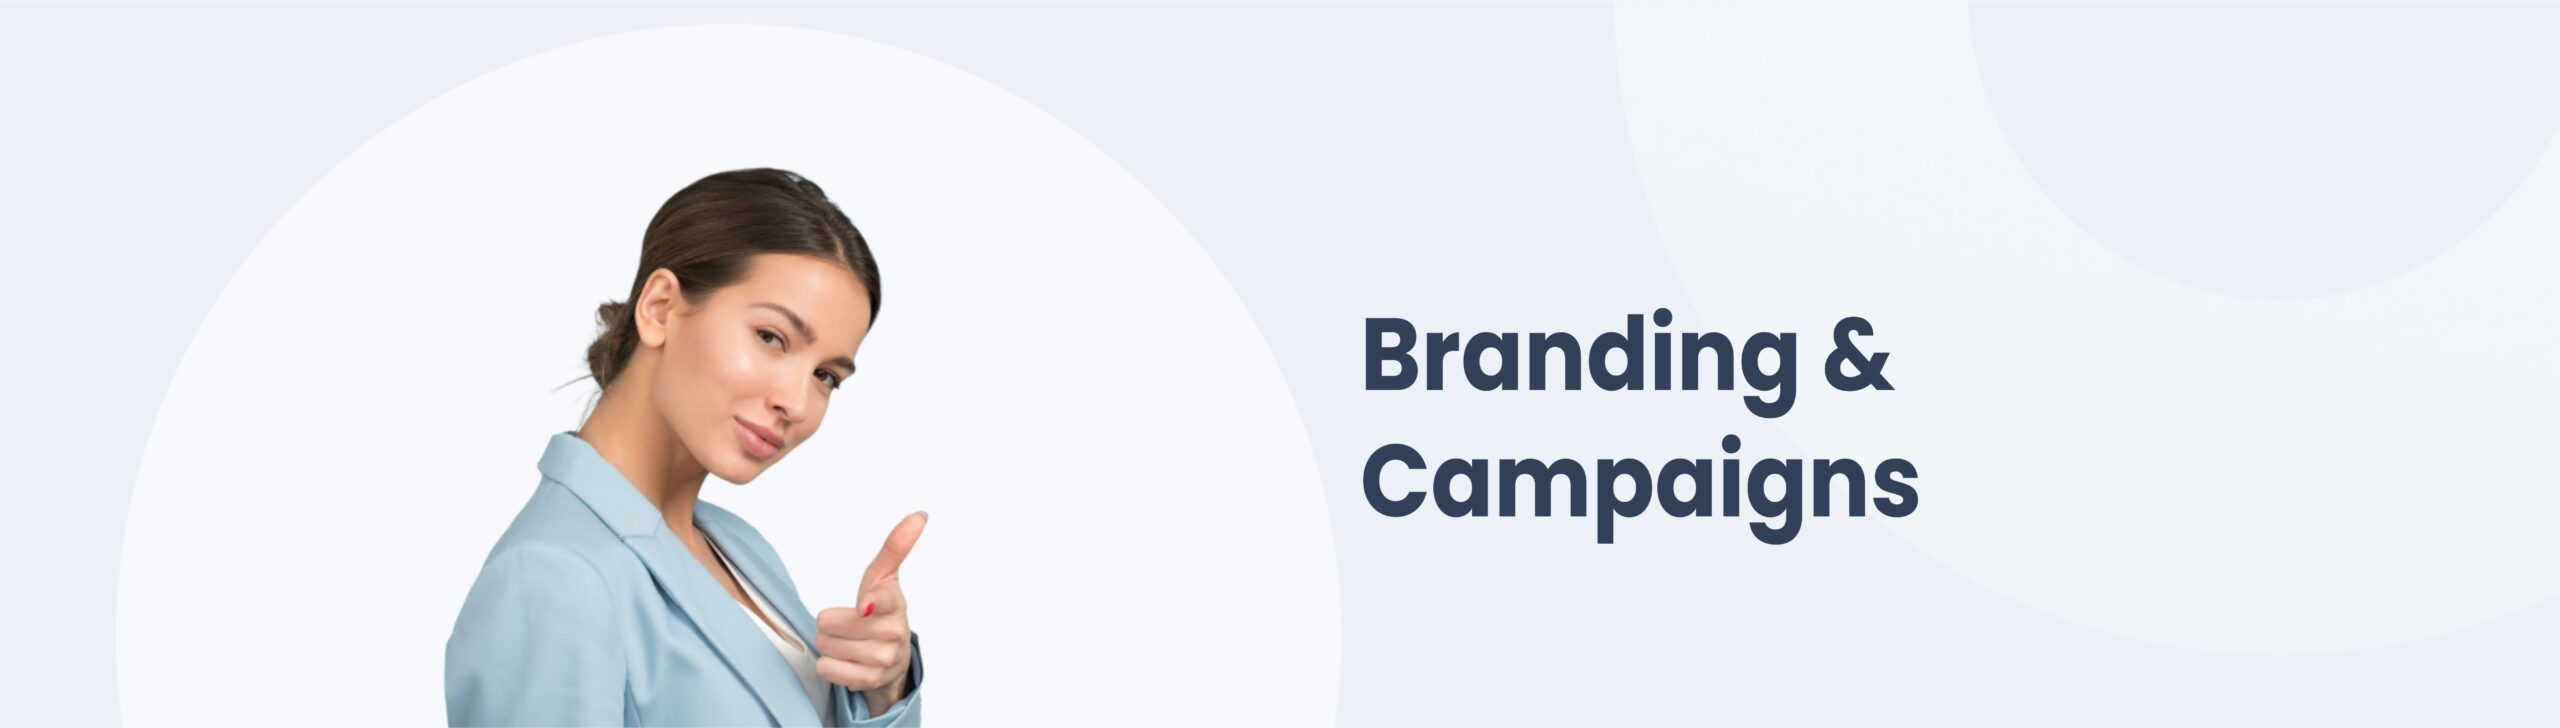 Branding and campaigns page banner image